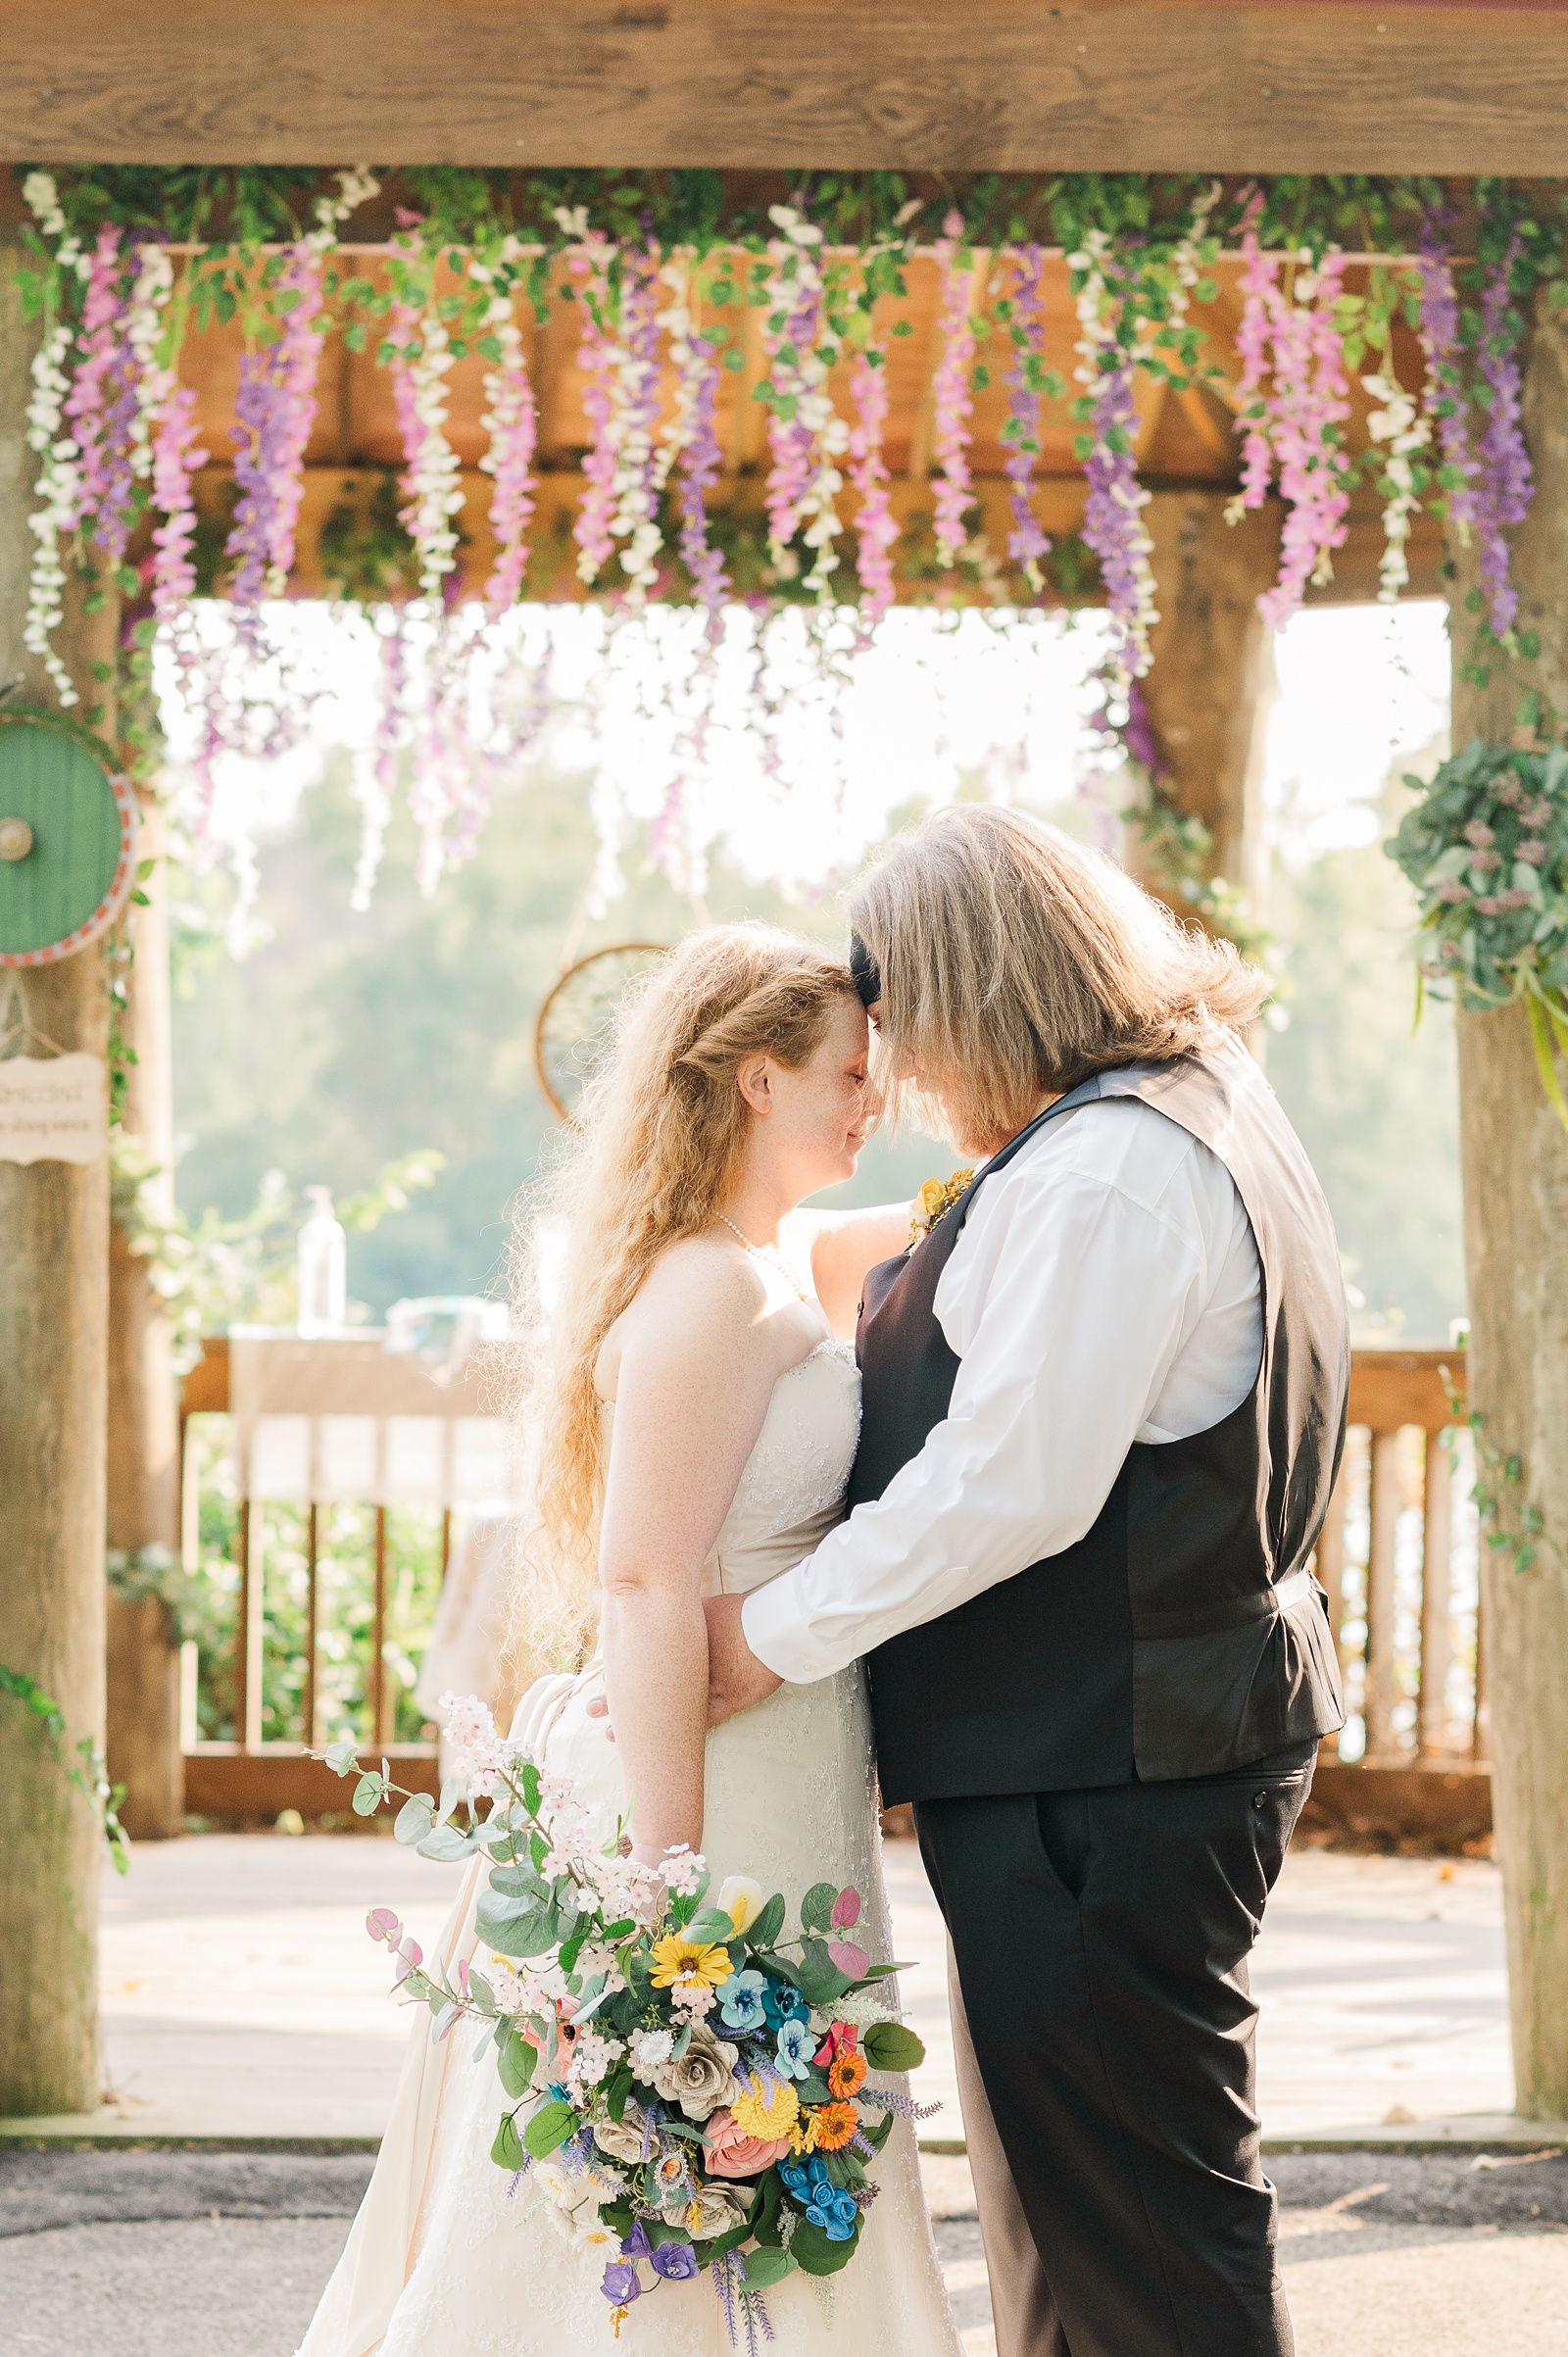 Bride and Groom Portraits during Fall Fairytale Inspire Intimate Ceremony at Osbourne Park in Richmond. Photography by Virginia Wedding Photographer Kailey Brianne Photography. 